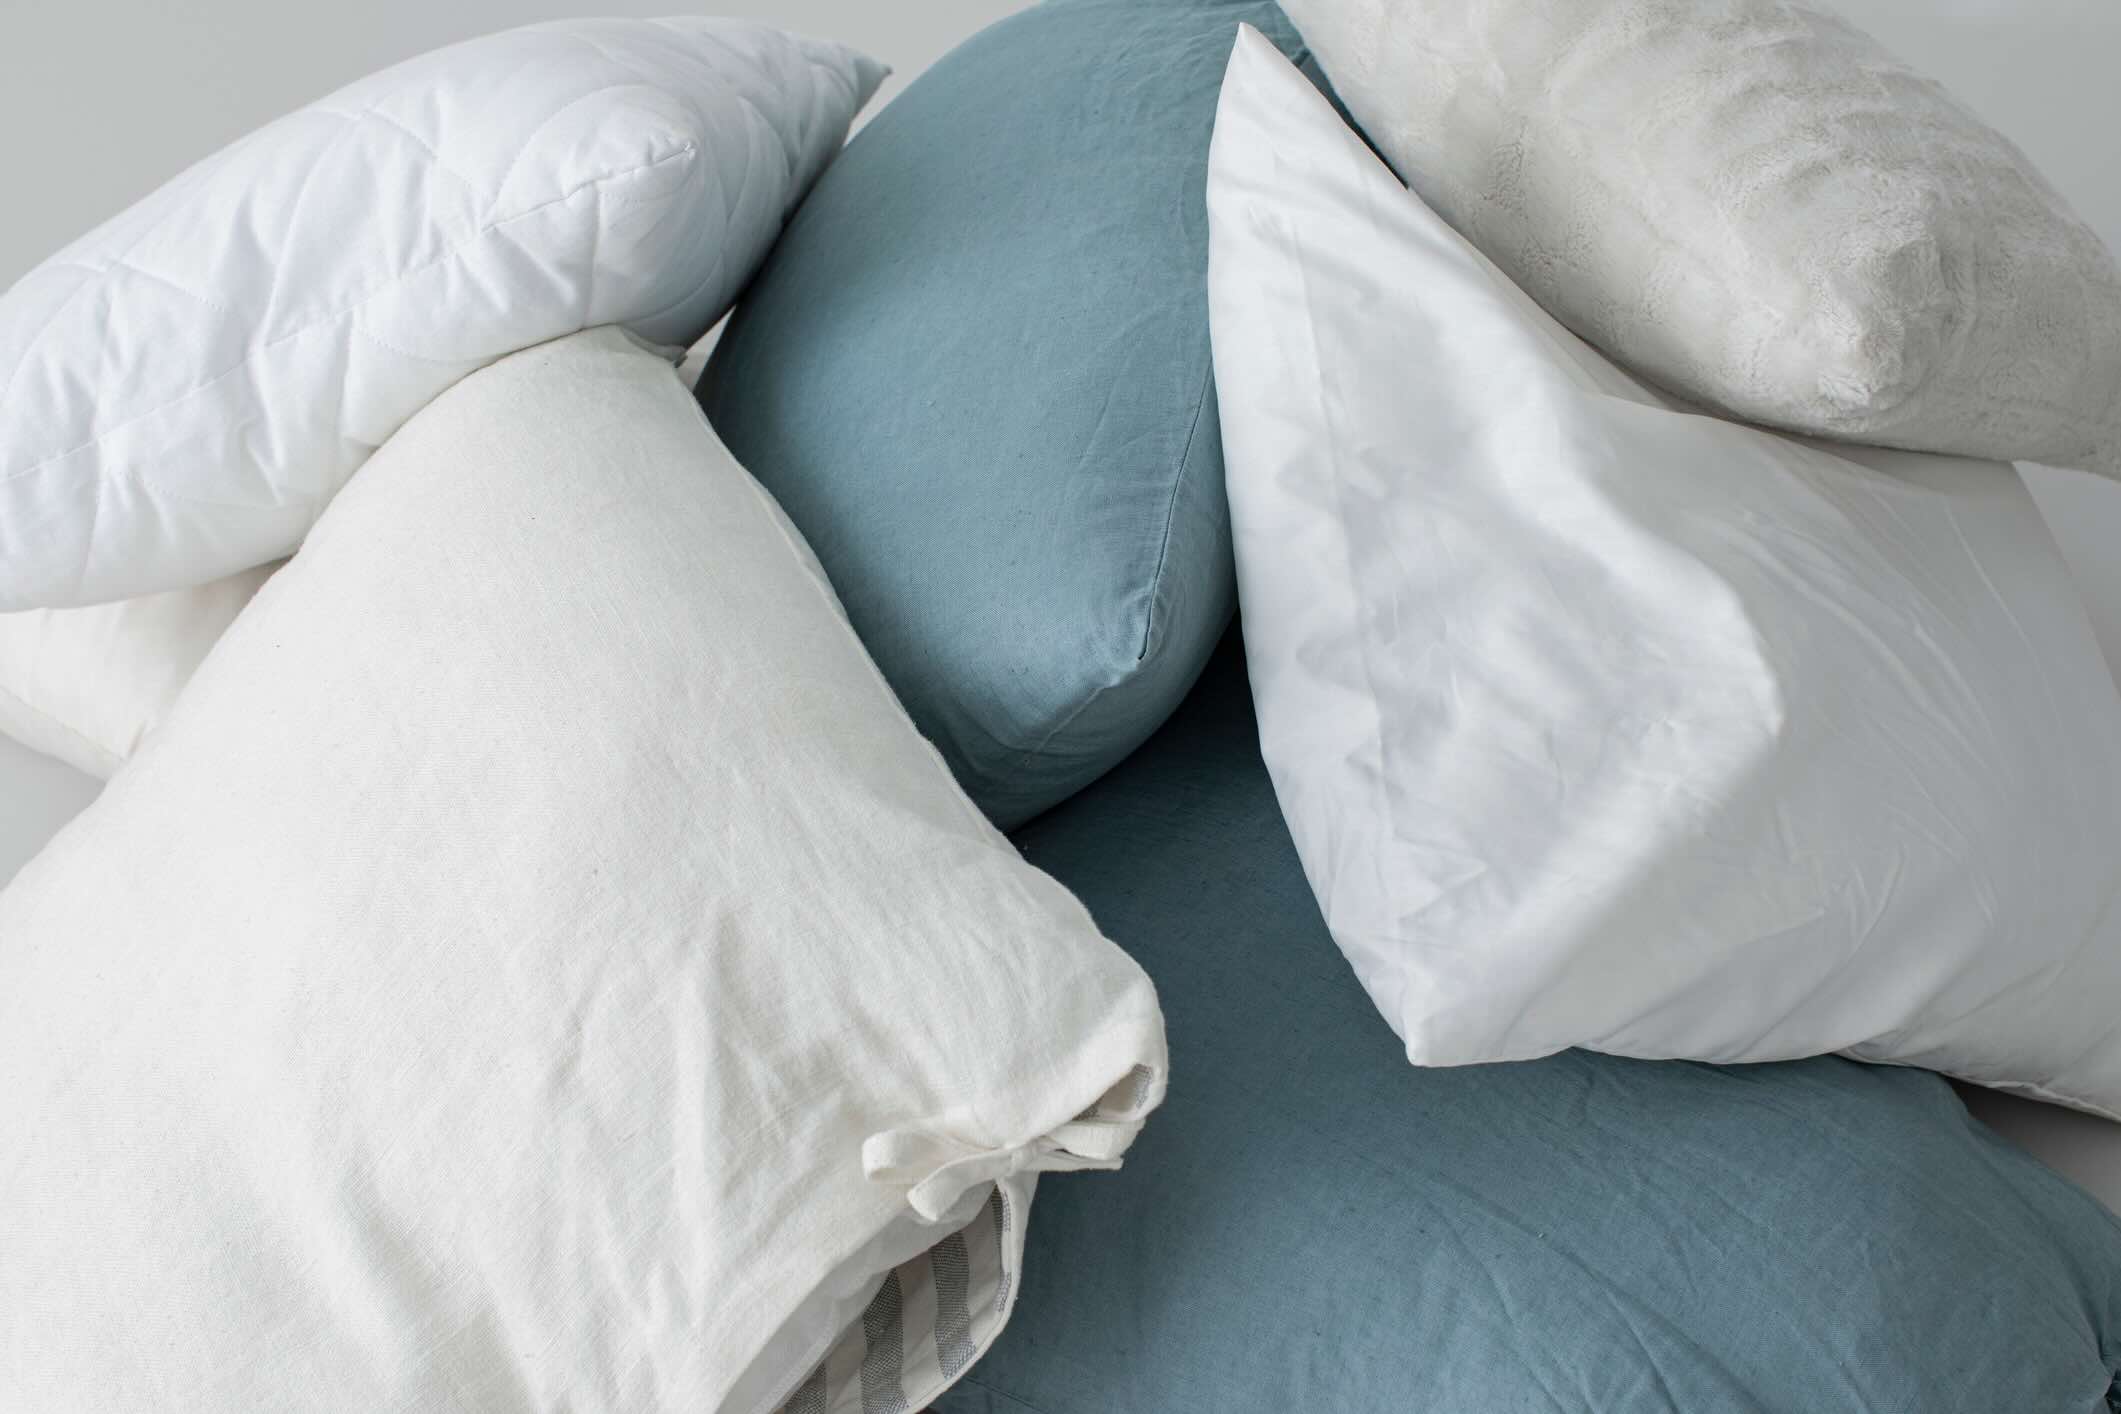 How To Fluff New Pillows